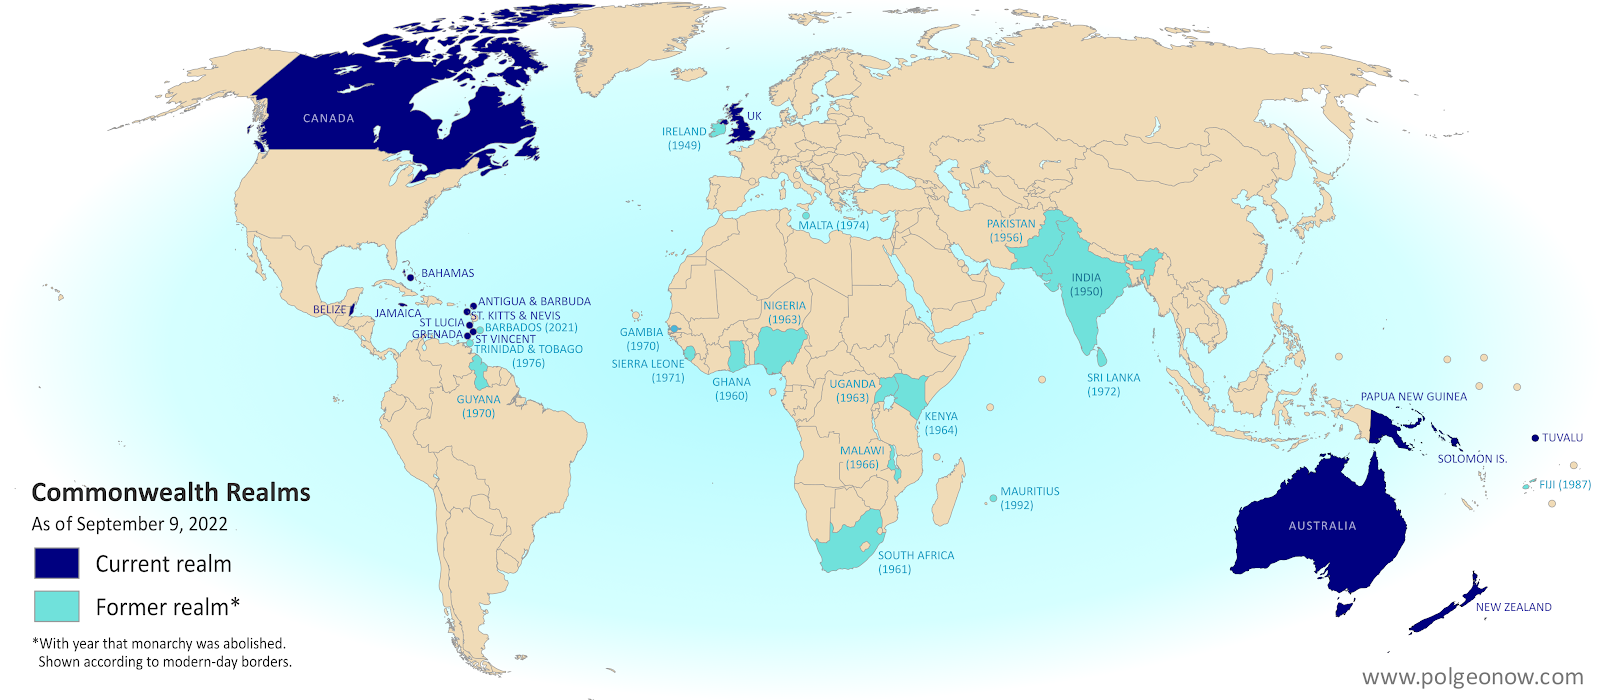 2022-09-09-commonwealth-realms-map-countries-with-king-charles-iii-1663058139.png